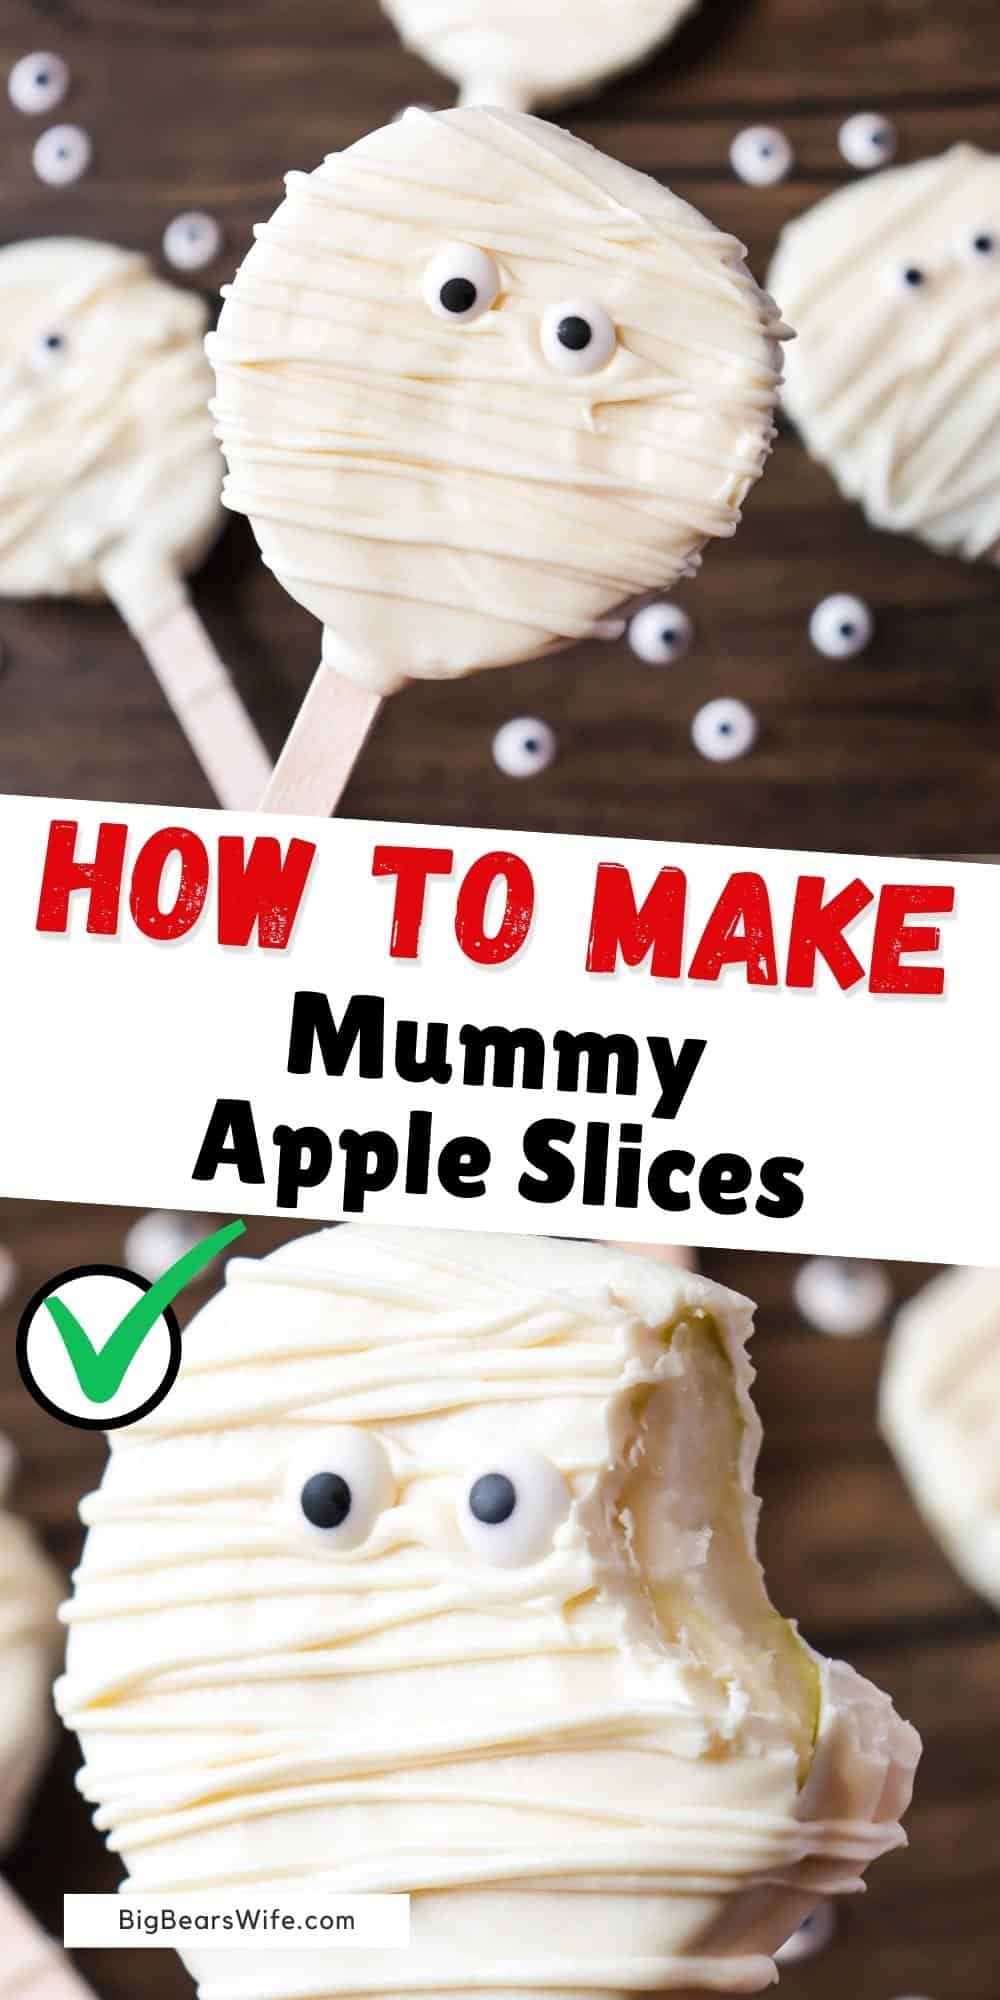 An easy Halloween dessert, these Mummy Apple Slices use slices of apples instead of the entire apple so you get more servings per apple!  via @bigbearswife